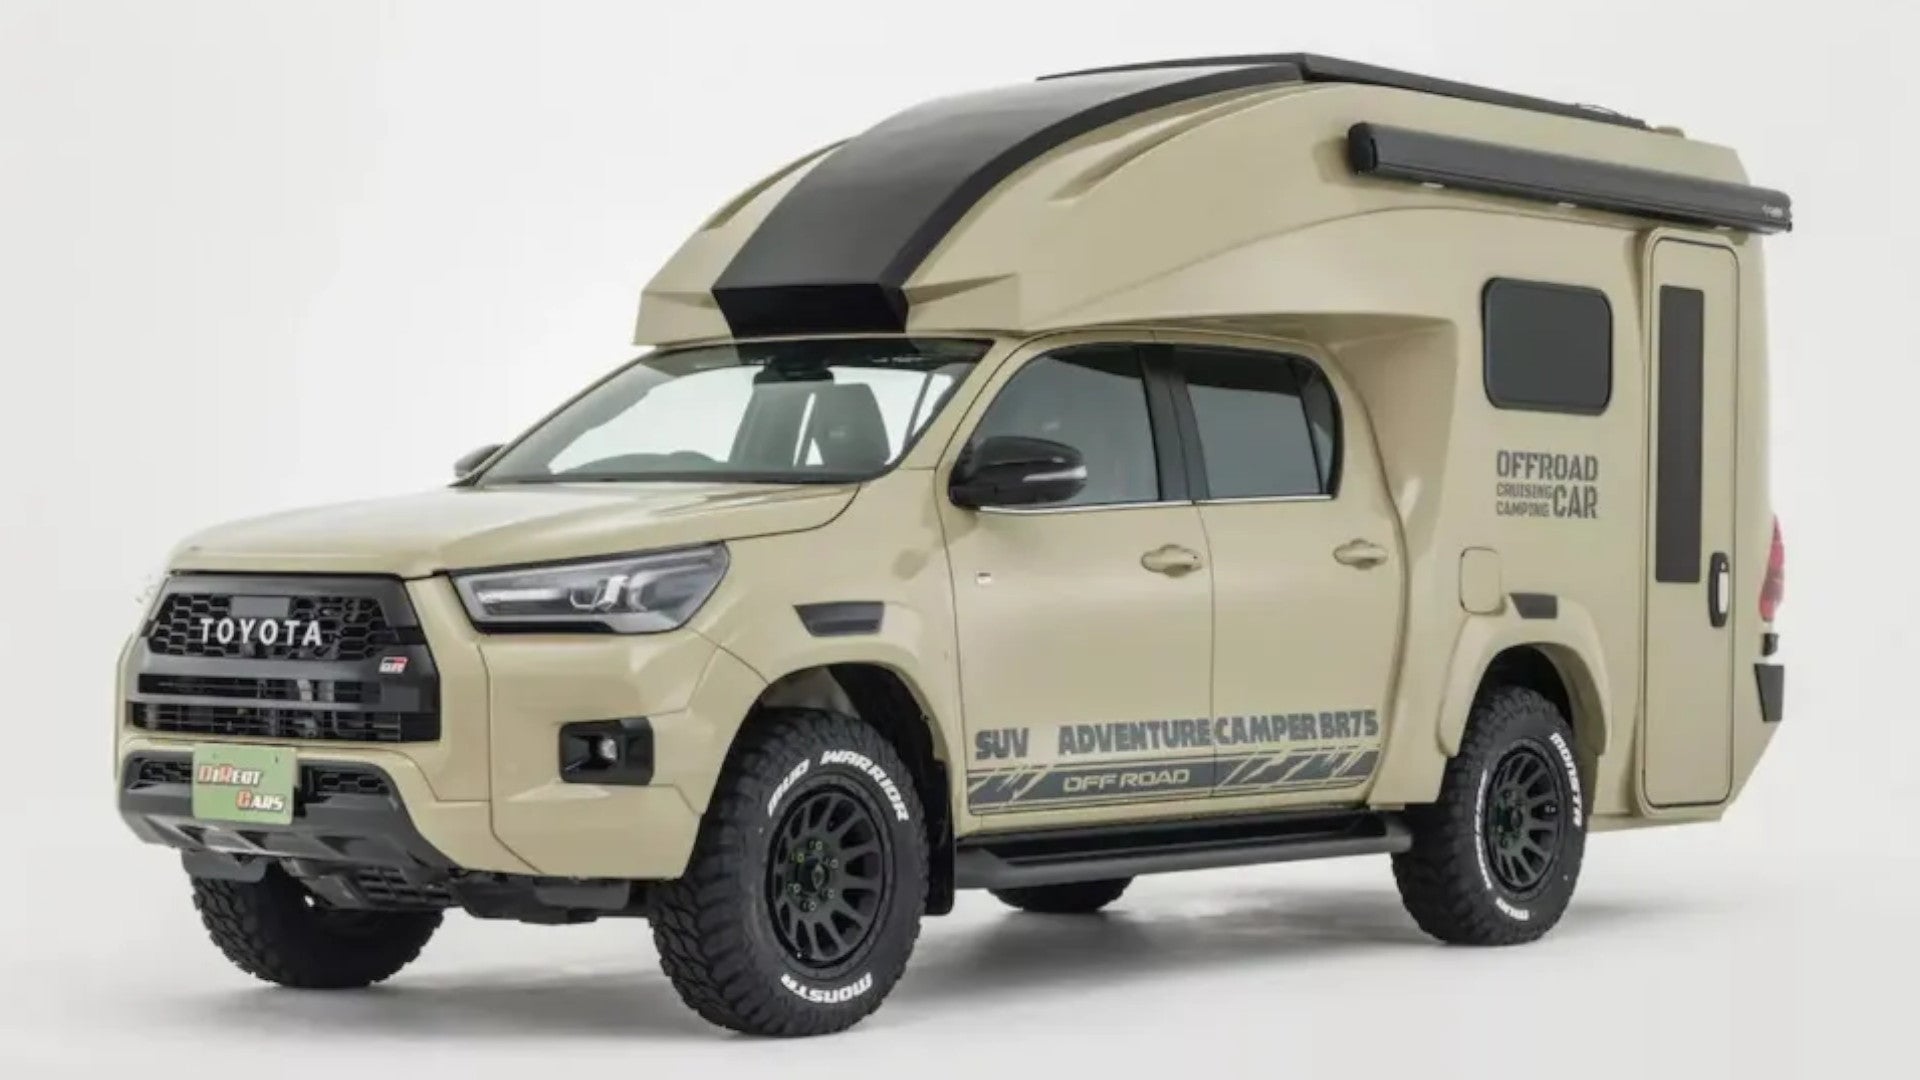 Toyota Hilux Motorhome With a Pass-Through Cab Is for Going Places